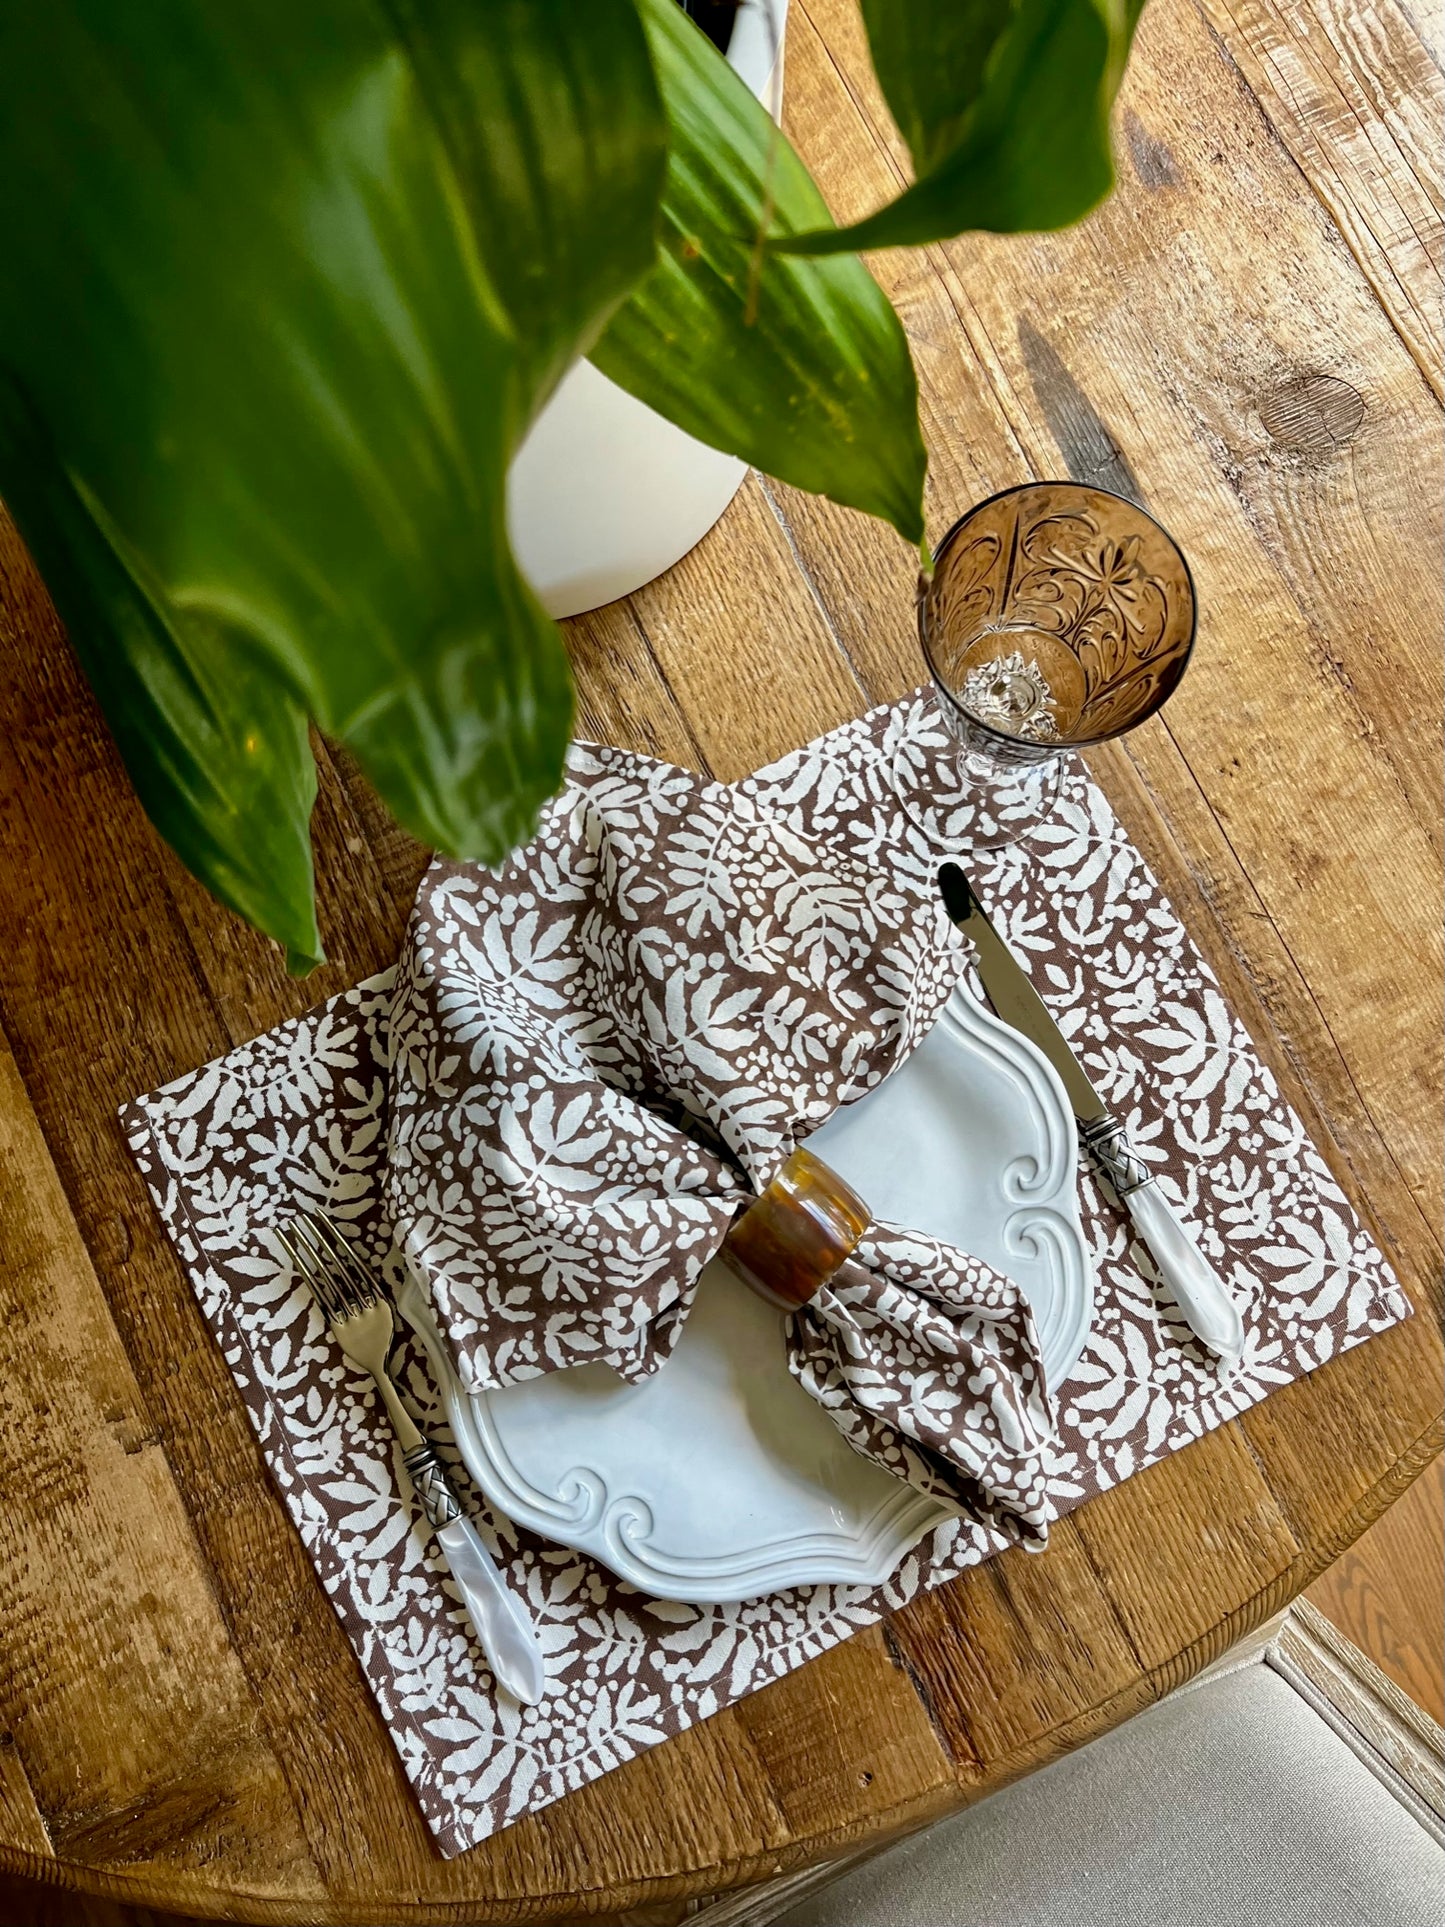 Gathered Garden Placemats in Saddle Brown - Set of 4